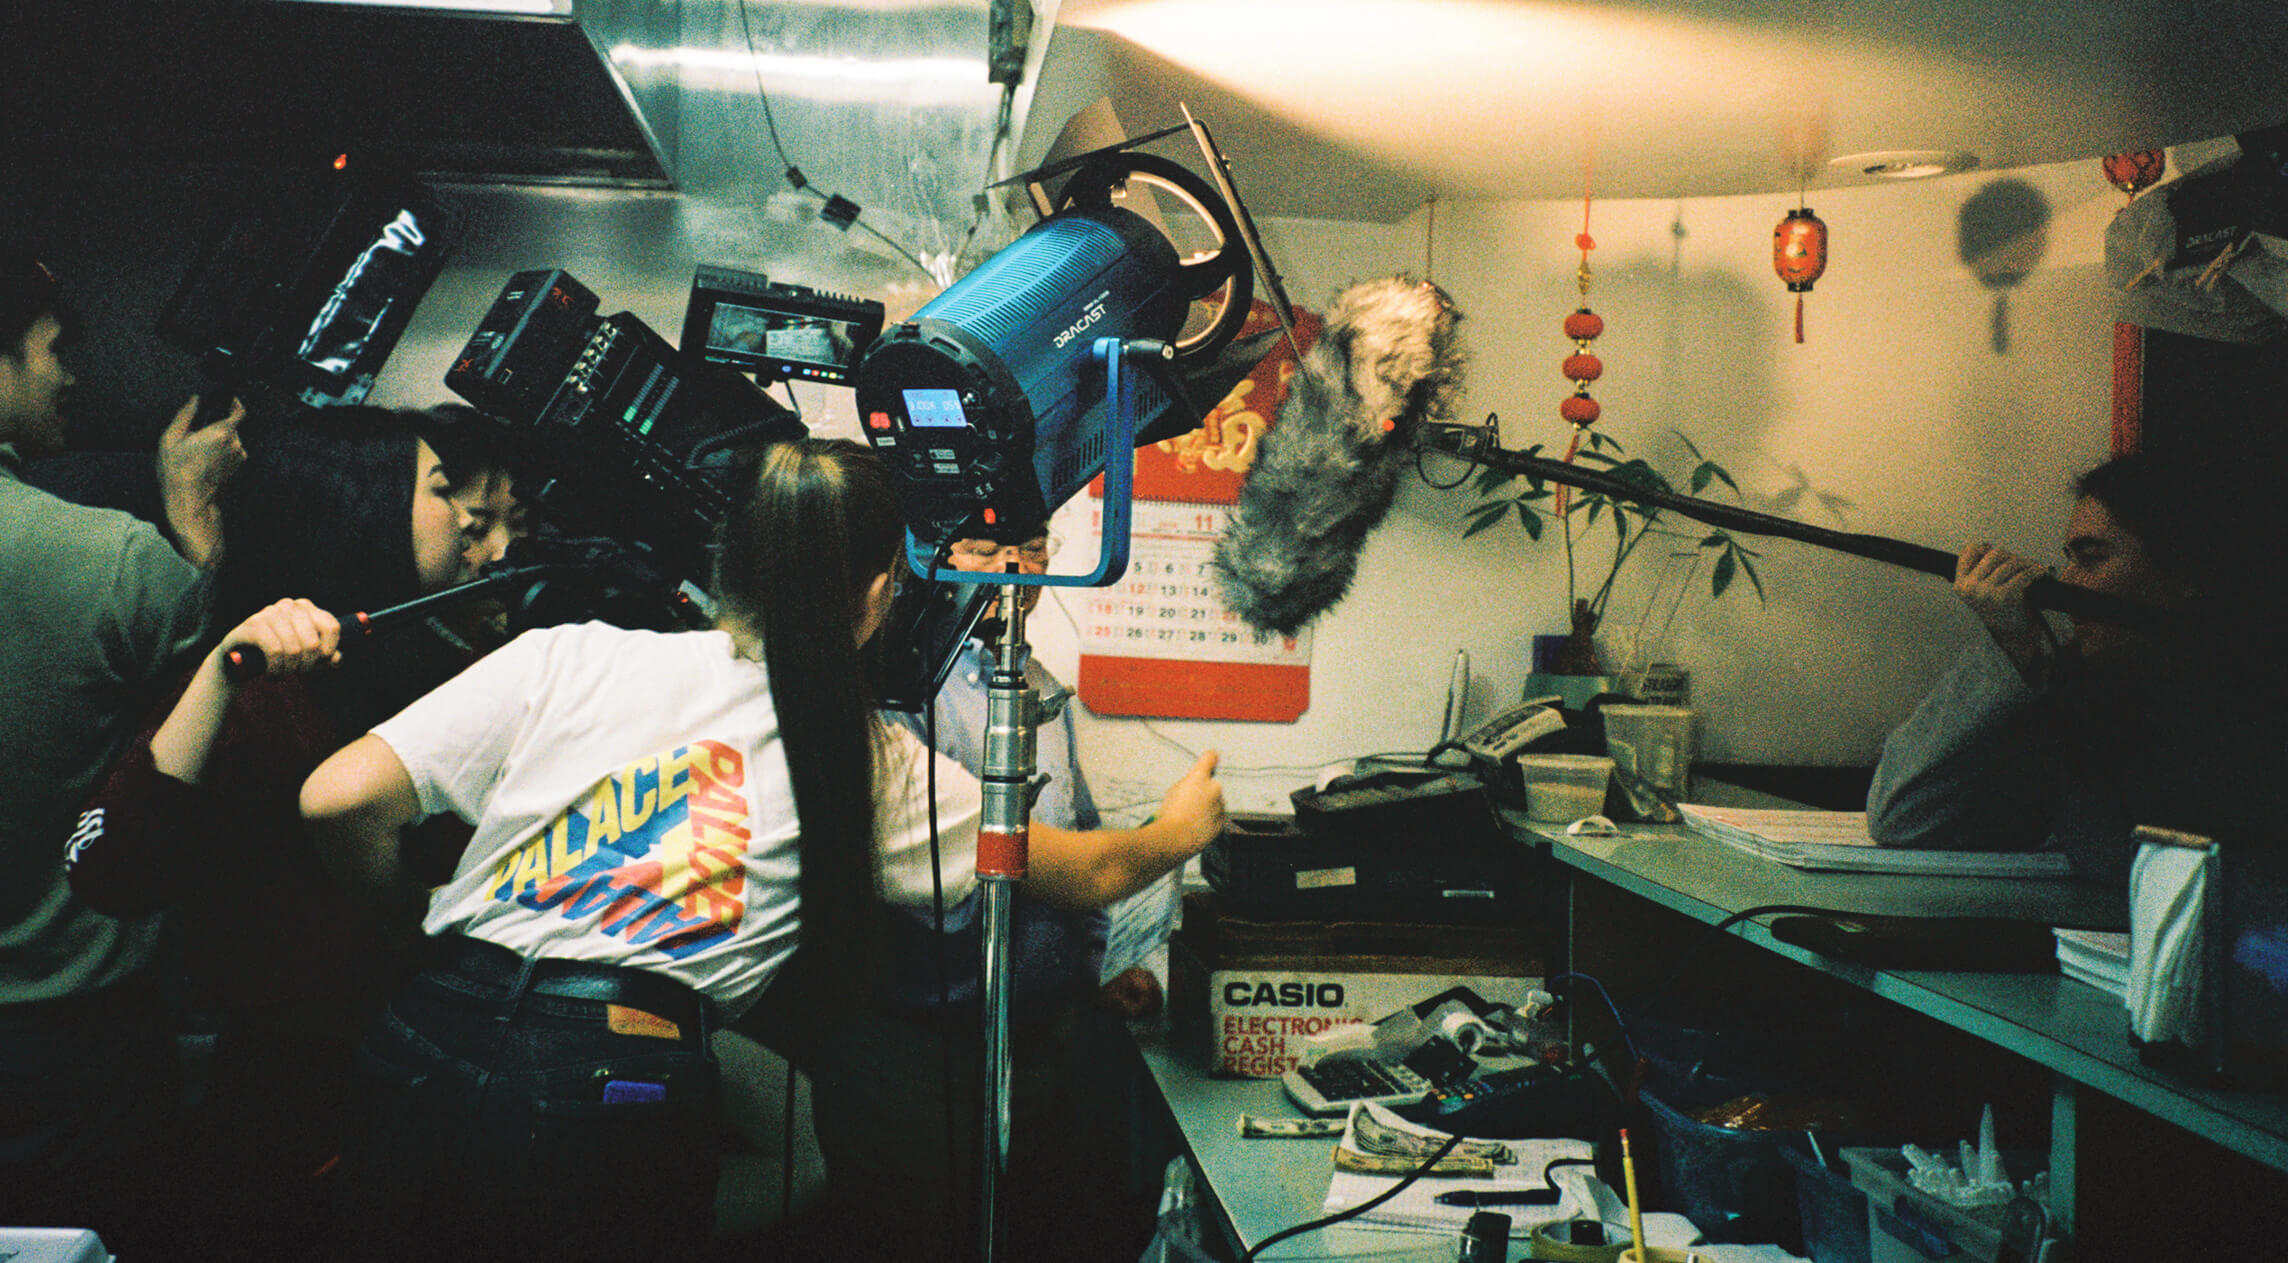 A camera crew works with a variety of equipment in a cramped room.